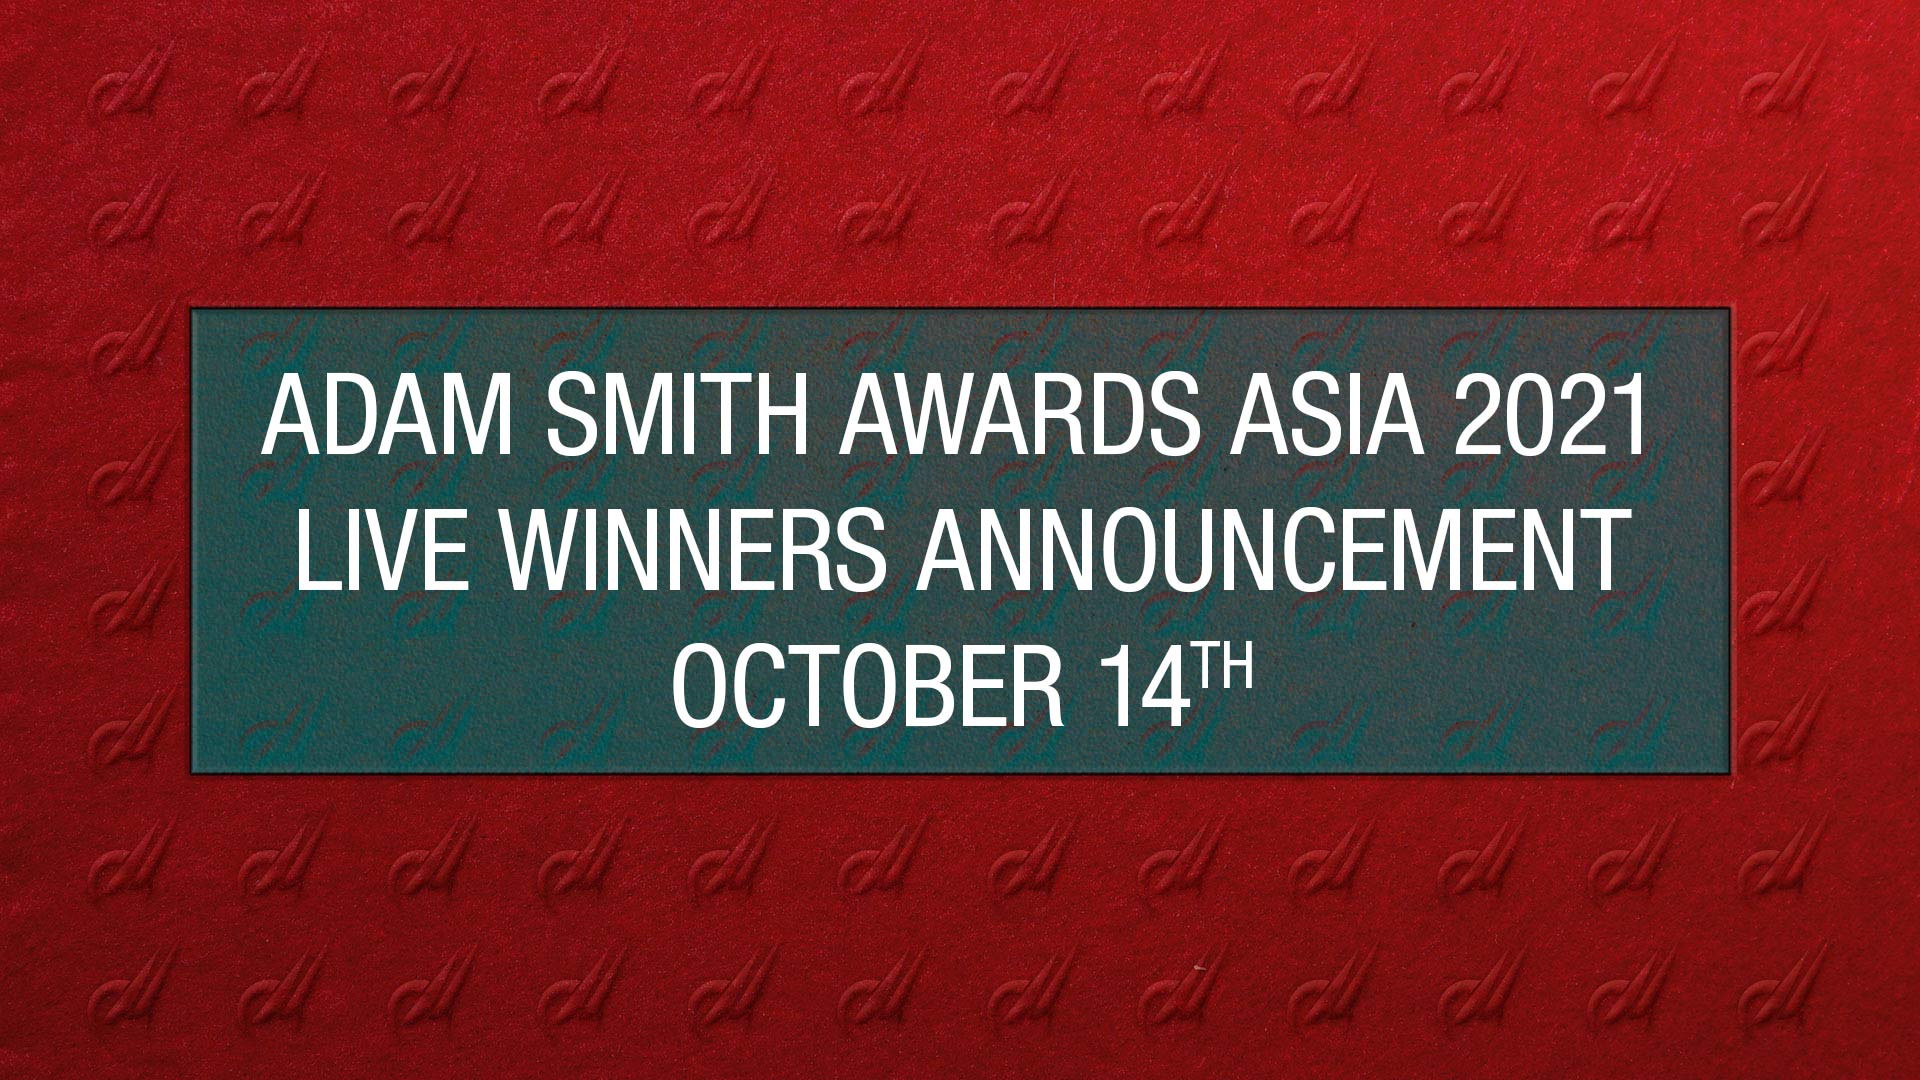 Adam Smith Awards Asia 2021: live winner’s announcement October 14th